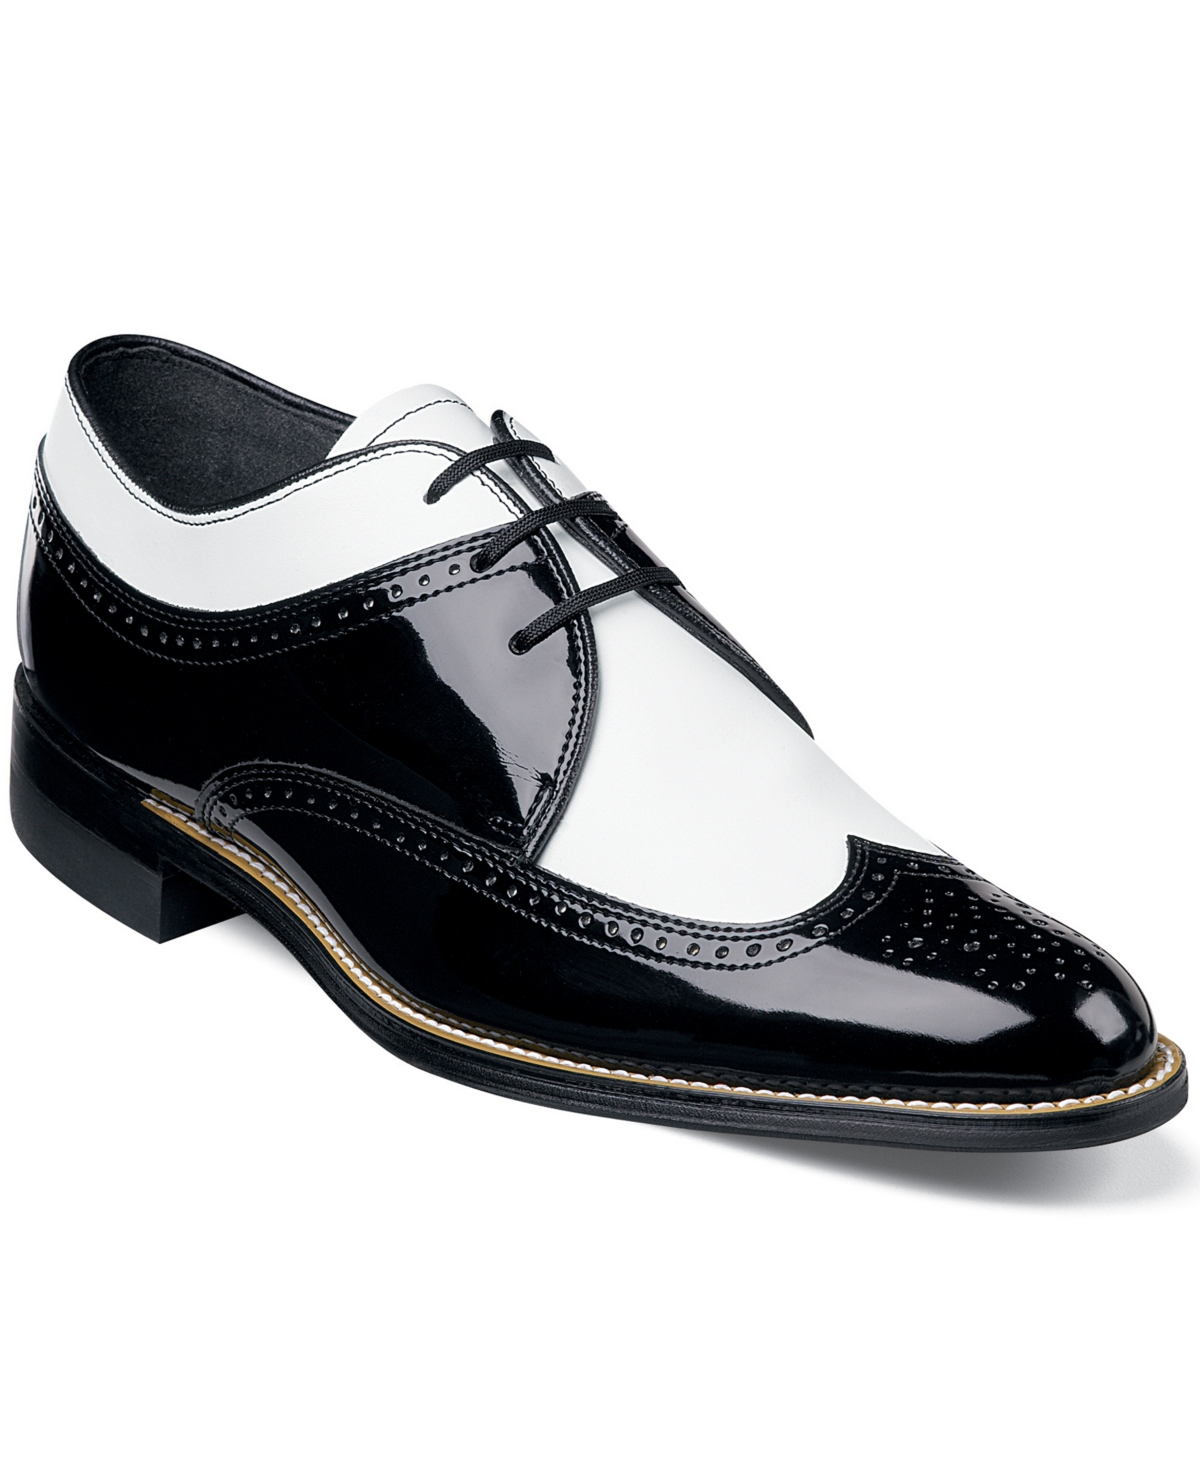 Dayton Wing-Tip Lace-Up Shoes - Black Patent and White Leather